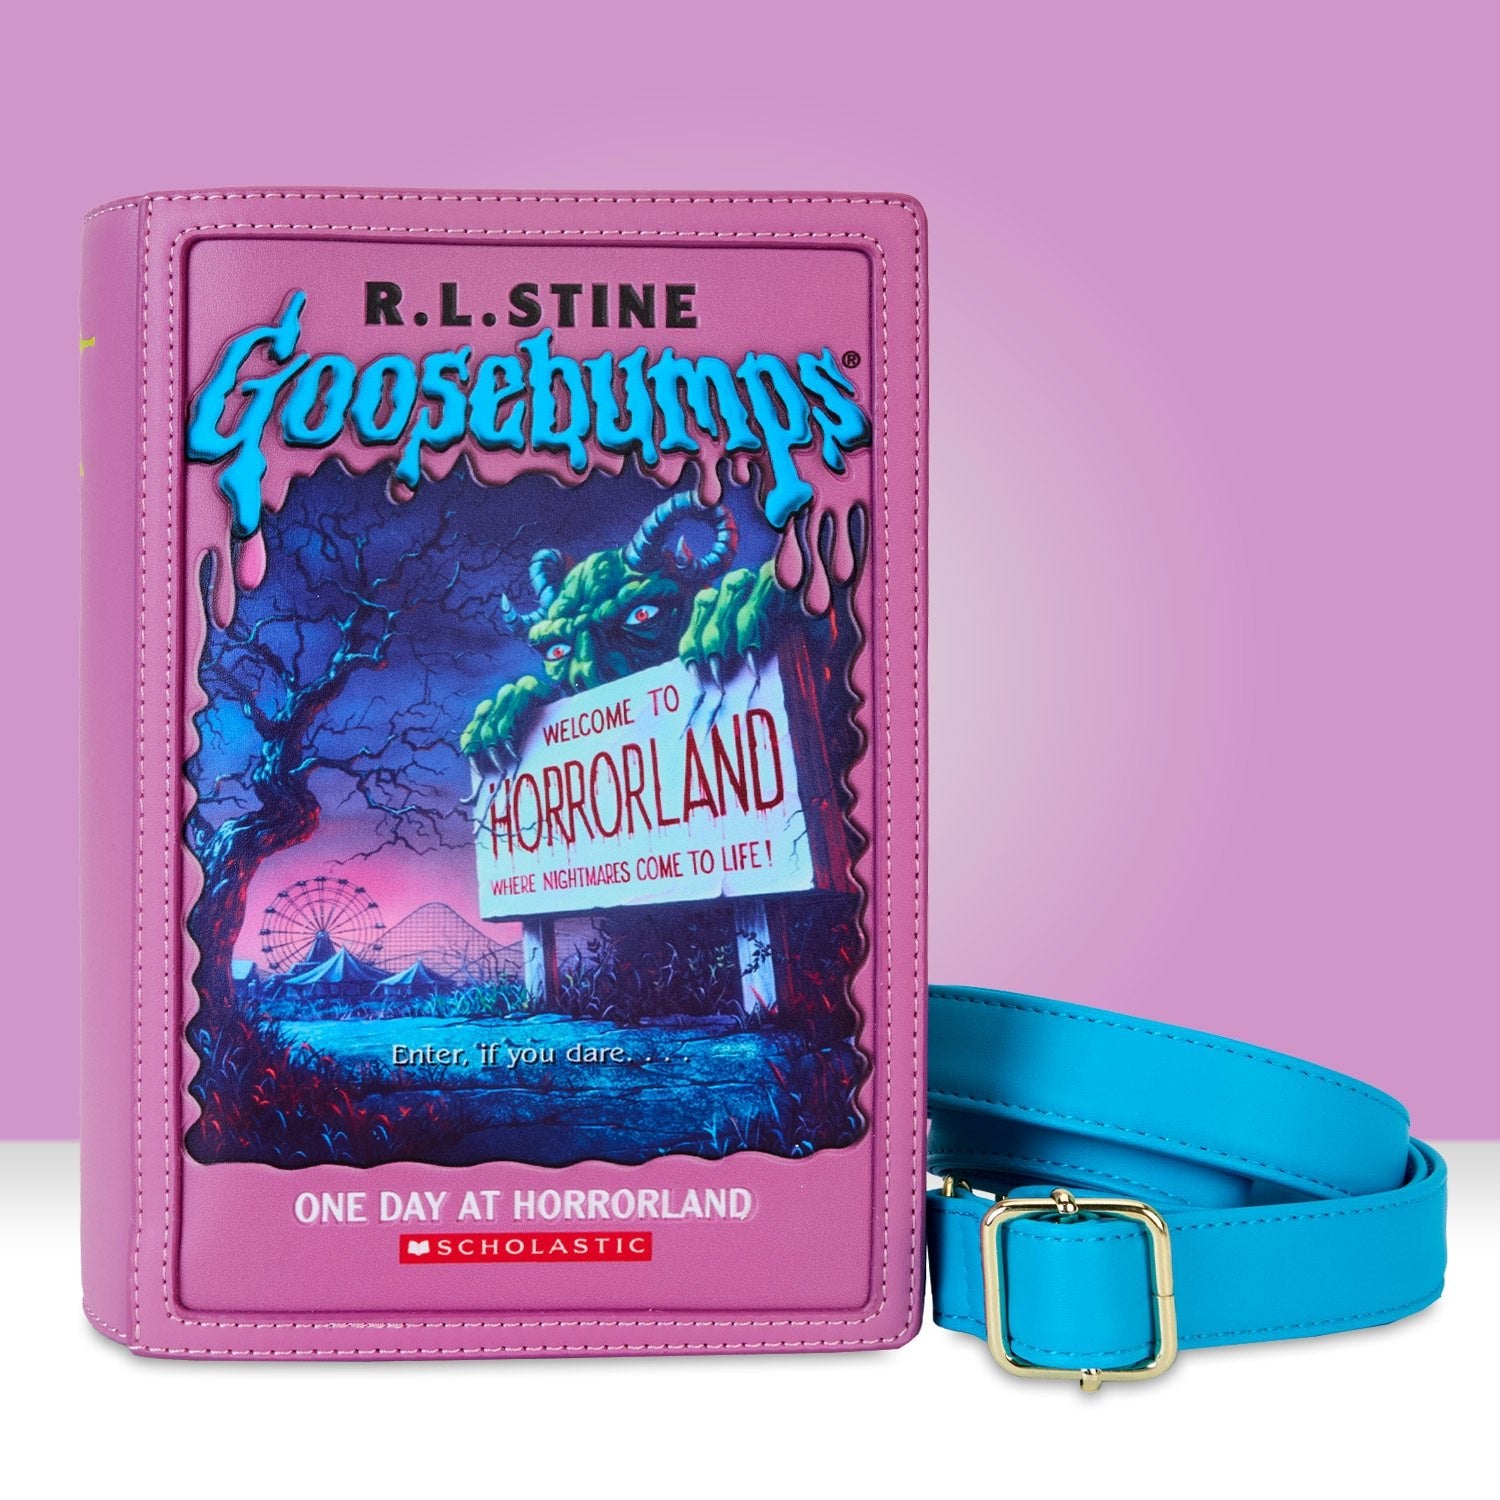 Loungefly x Goosebumps One Day at Horrorland Book Crossbody Bag - GeekCore